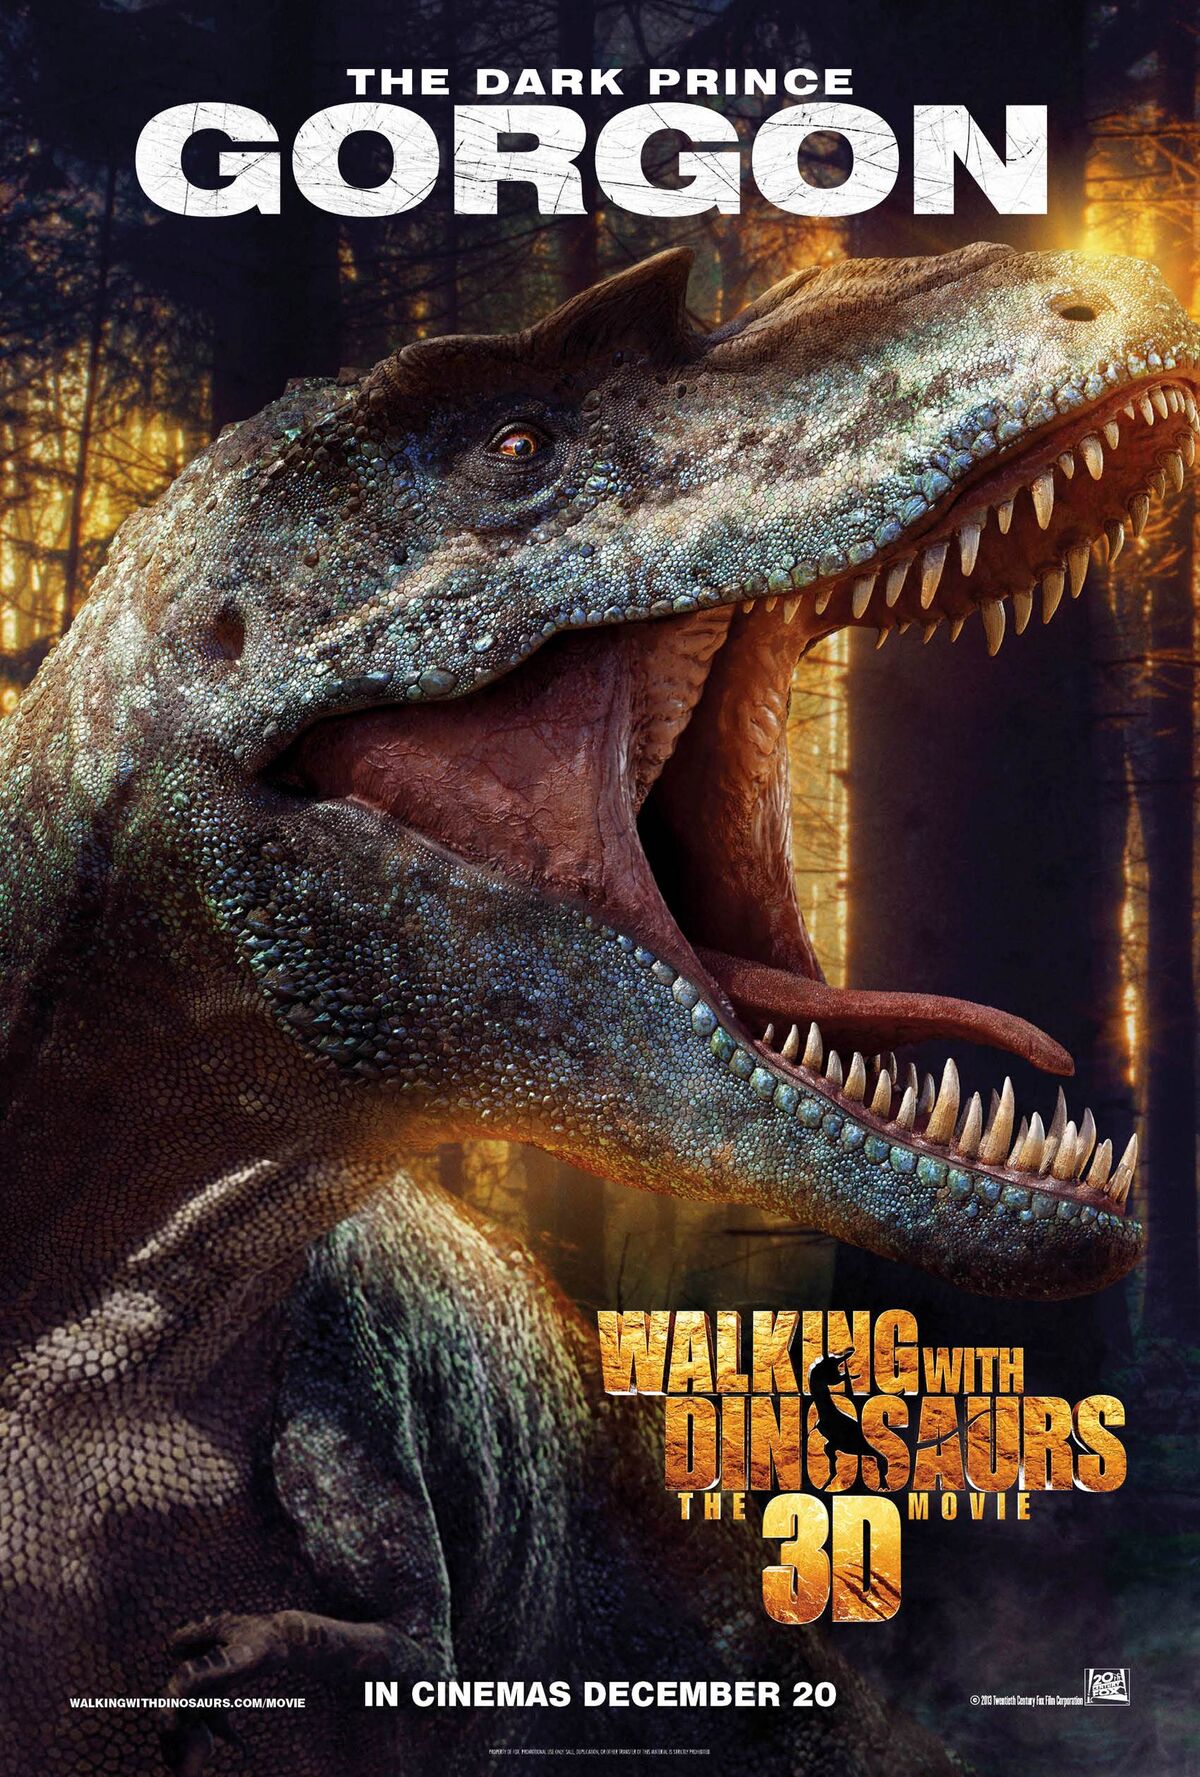 walking with dinosaurs 3d patchi vs gorgon